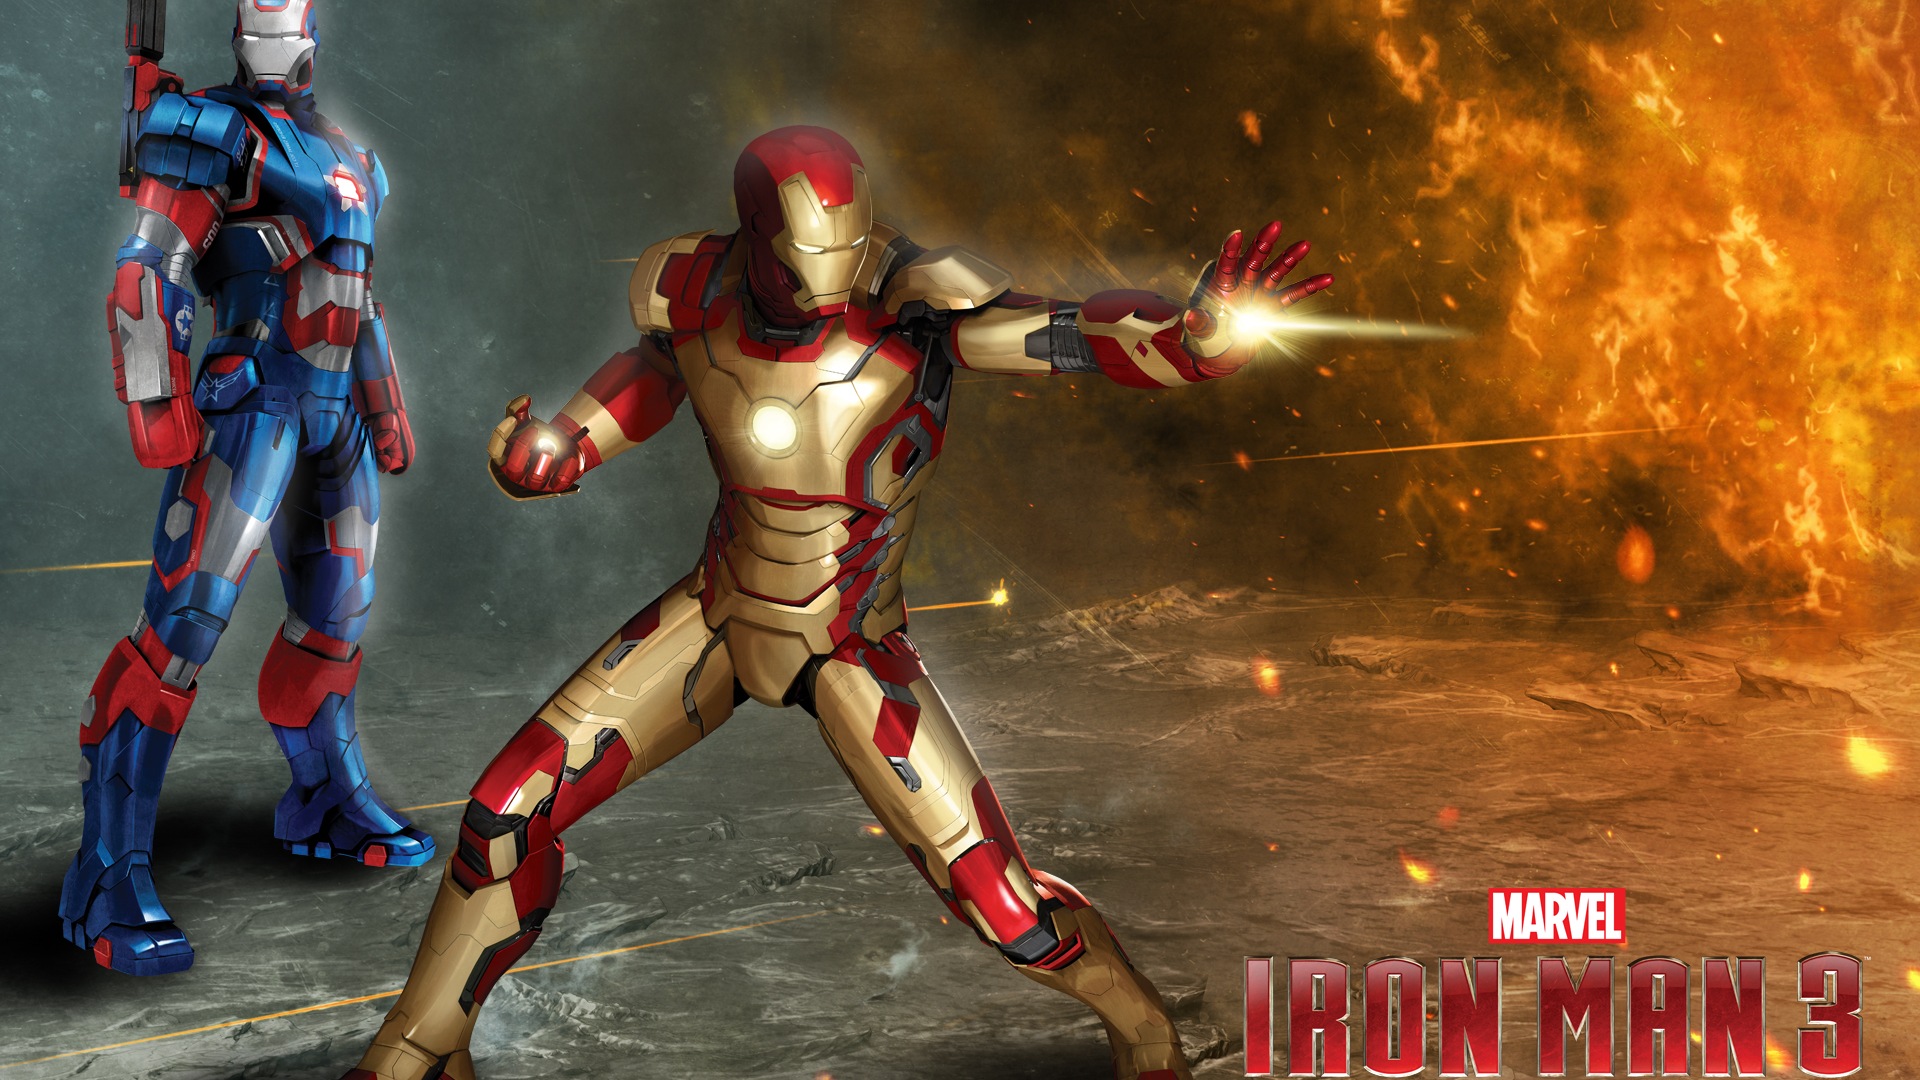 2013 Iron Man 3 newest HD wallpapers #7 - 1920x1080